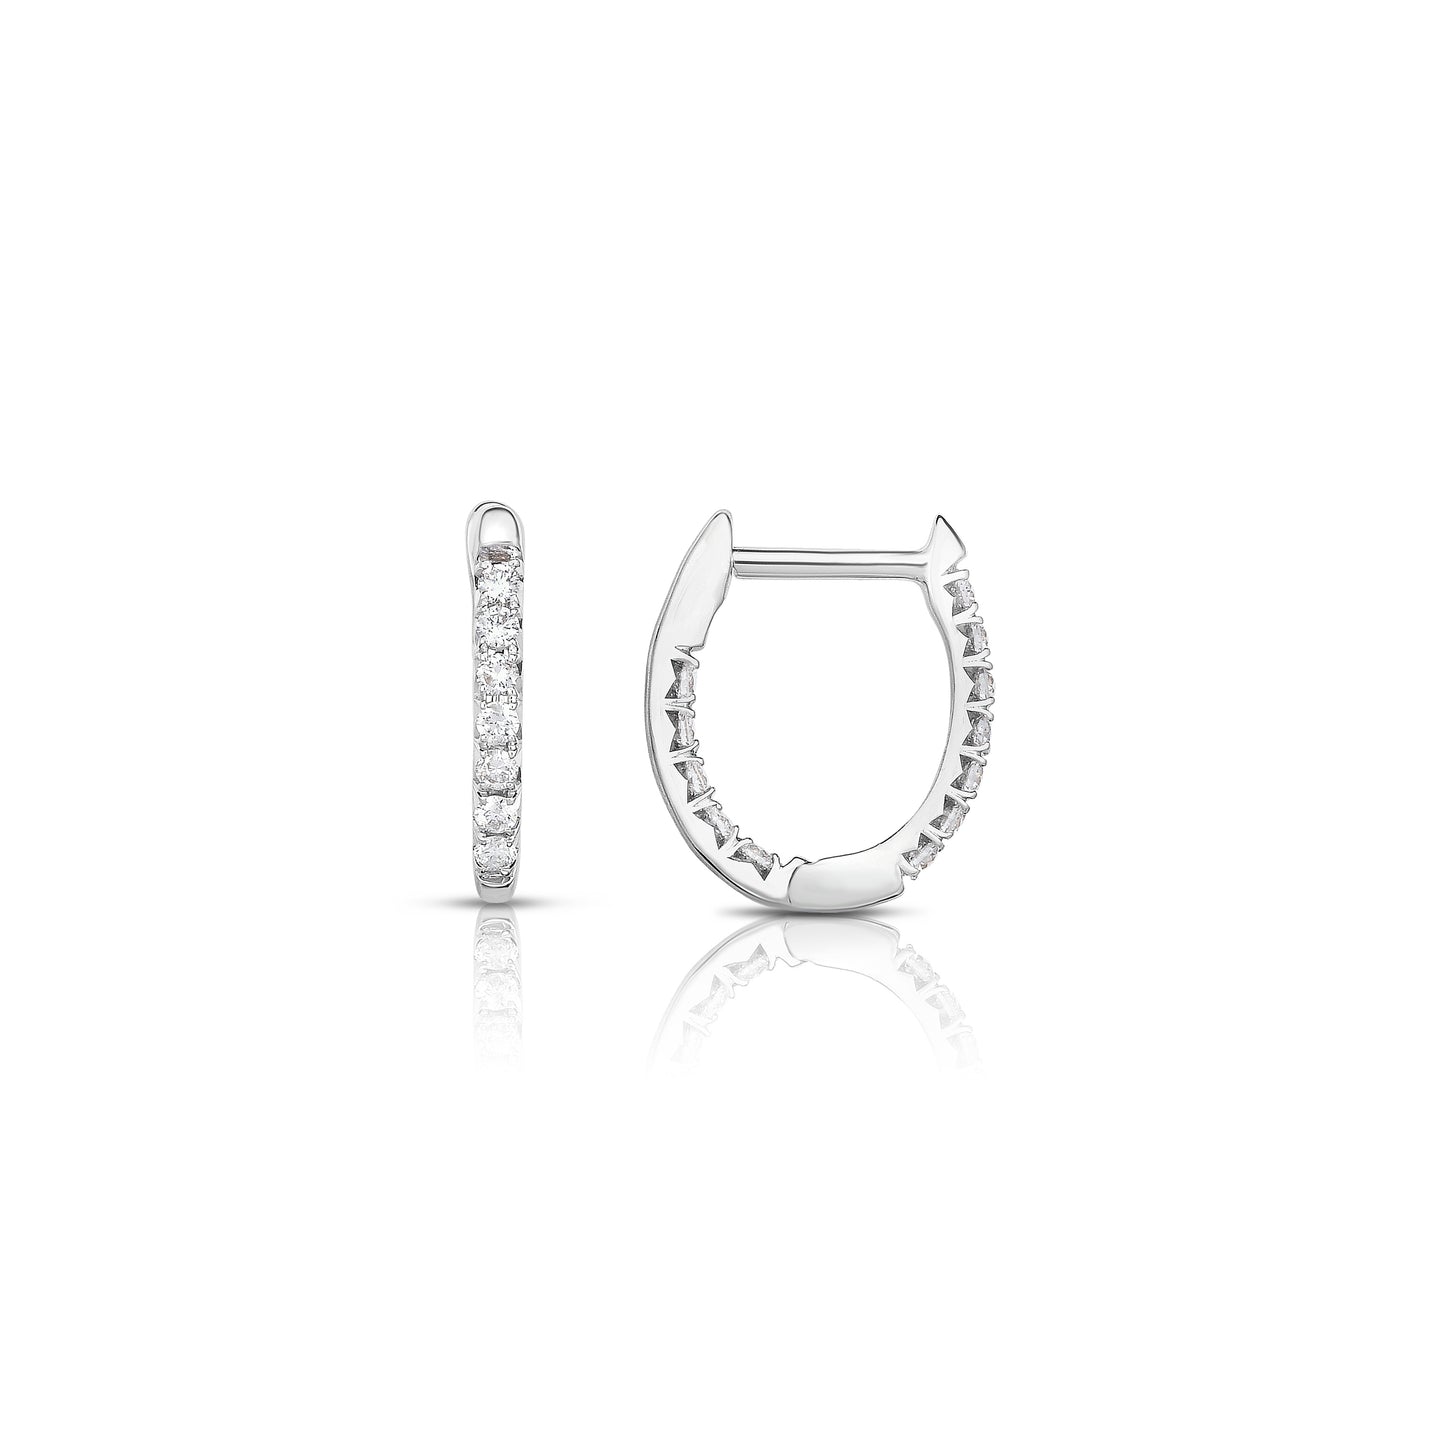 Sabel Collection 14K White Gold Small Oval Inside Out Diamond Hoop Earrings